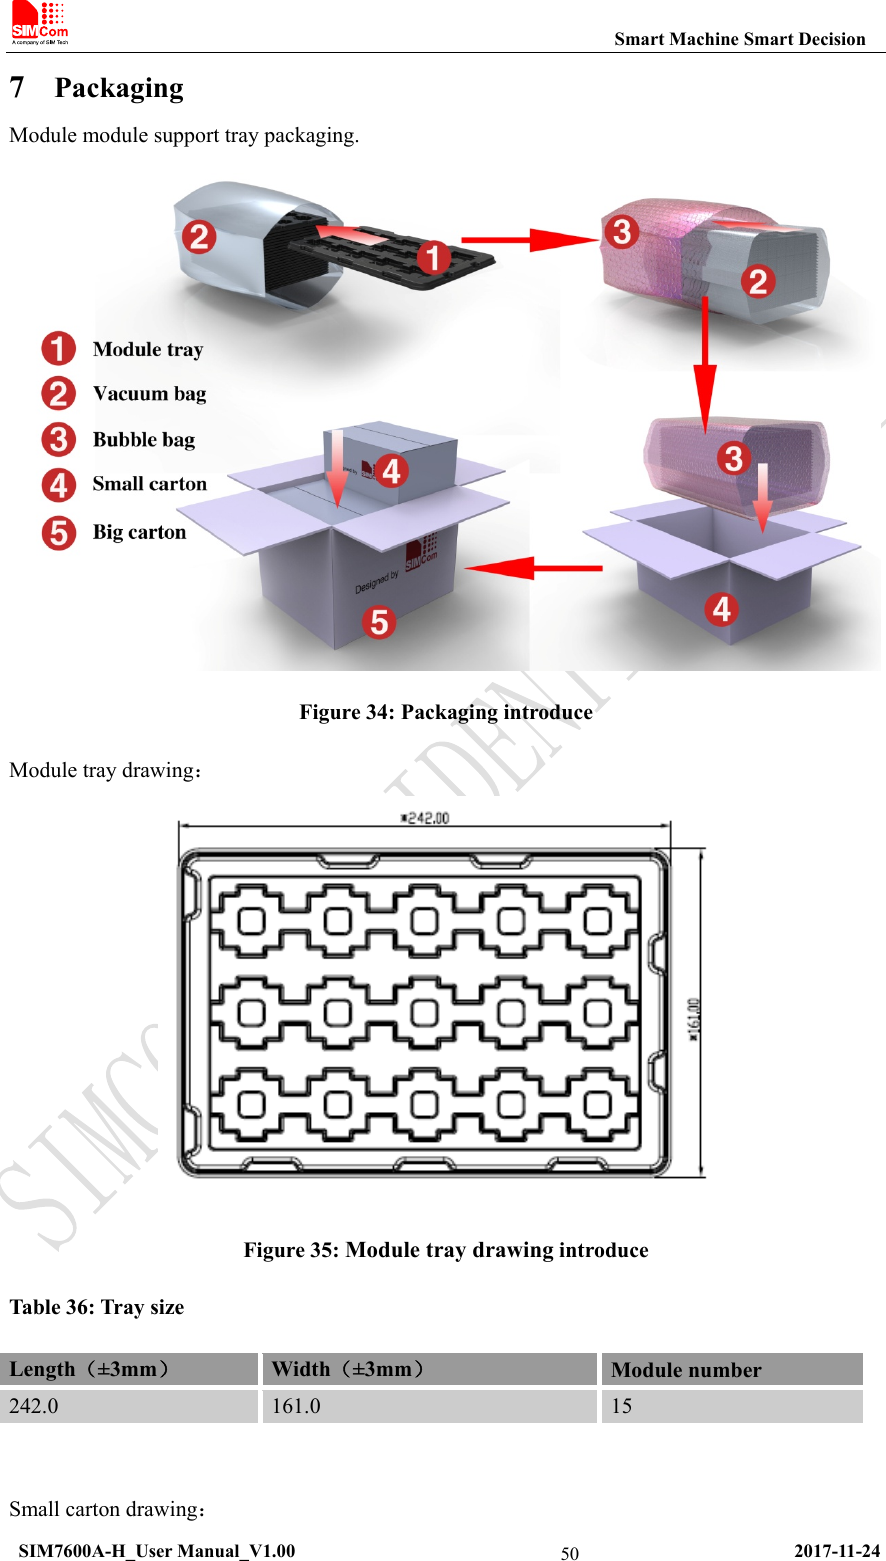                                                           Smart Machine Smart Decision  SIM7600A-H_User Manual_V1.00                                                     2017-11-24 507 Packaging Module module support tray packaging.  Figure 34: Packaging introduce Module tray drawing：  Figure 35: Module tray drawing introduce Table 36: Tray size Length（±3mm） Width（±3mm） Module number 242.0  161.0  15   Small carton drawing： 